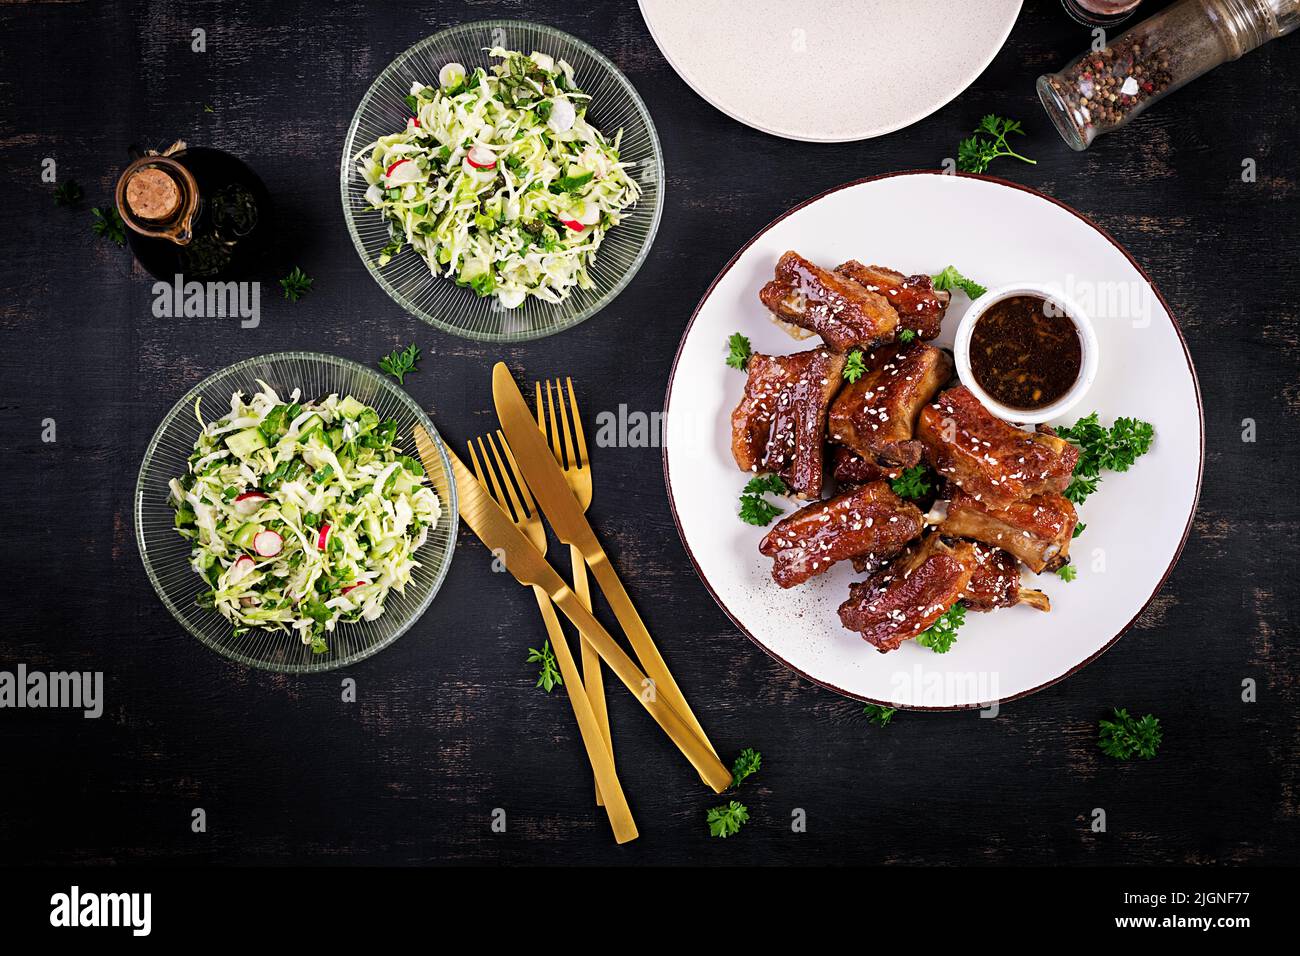 Delicious barbecued spare ribs on plate on dark background. Tasty bbq meat. Top view, flat lay Stock Photo